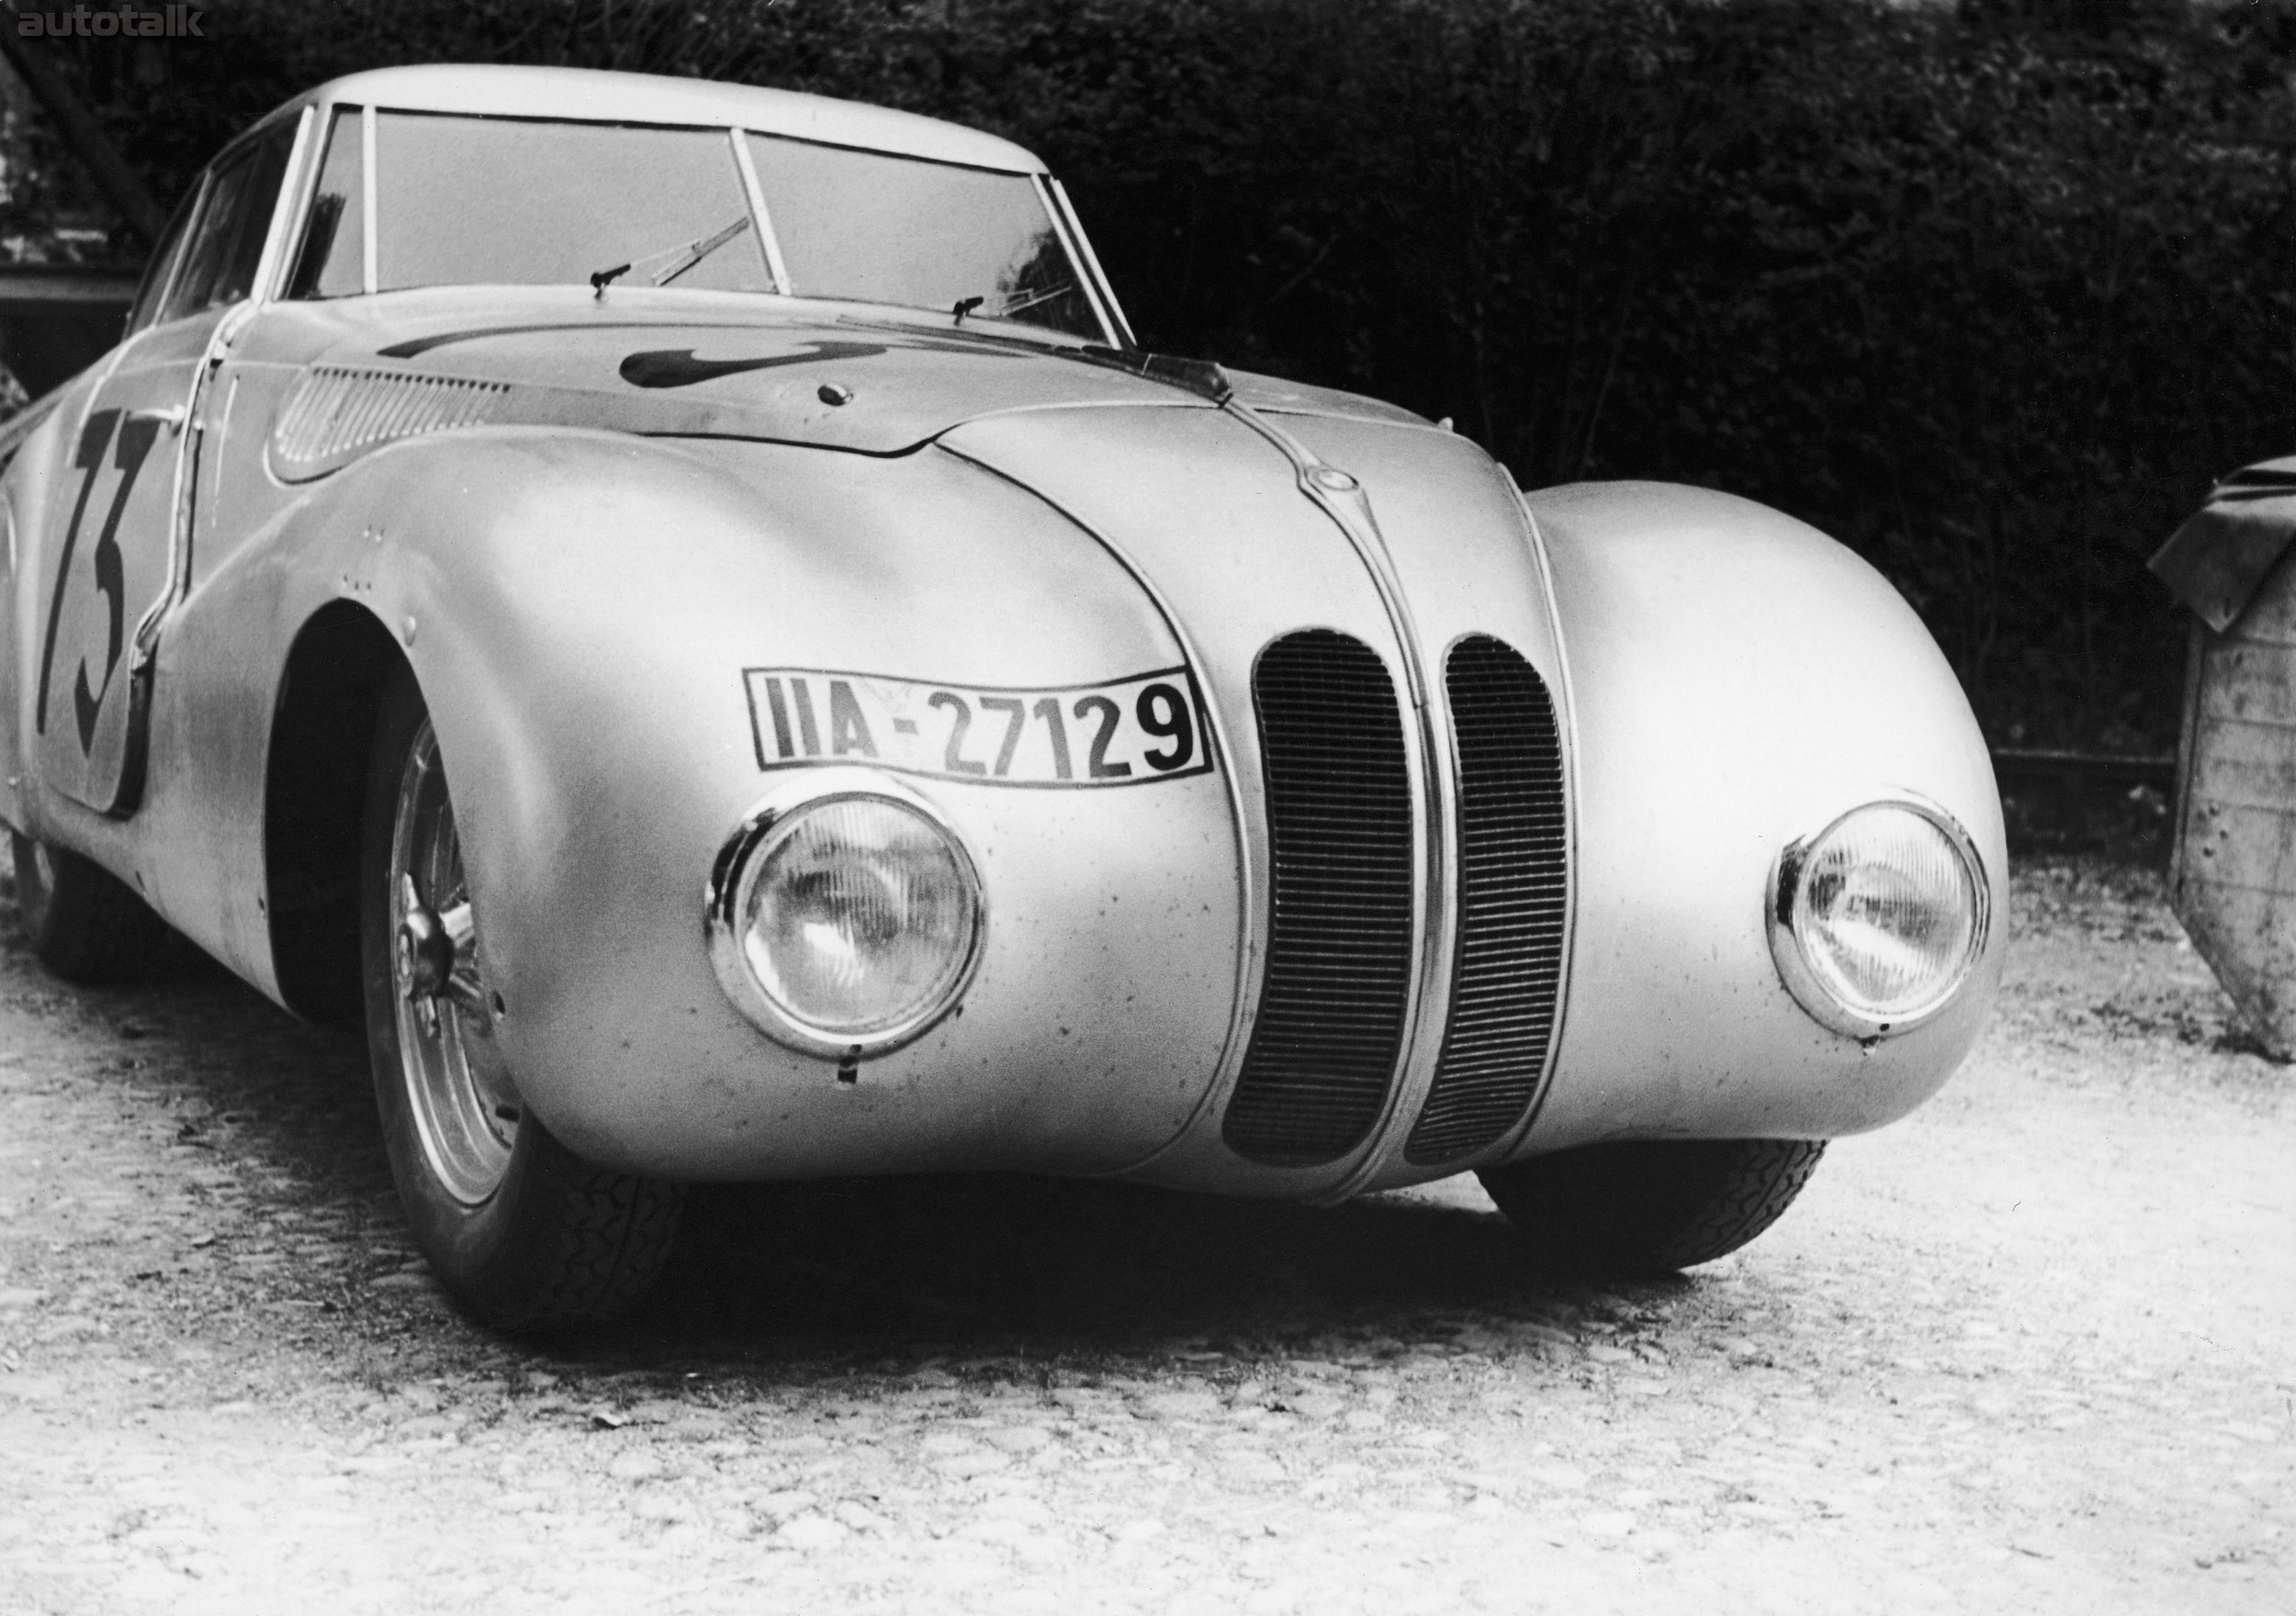 BMW 328 Kamm Coupé at Mille Miglia 1940